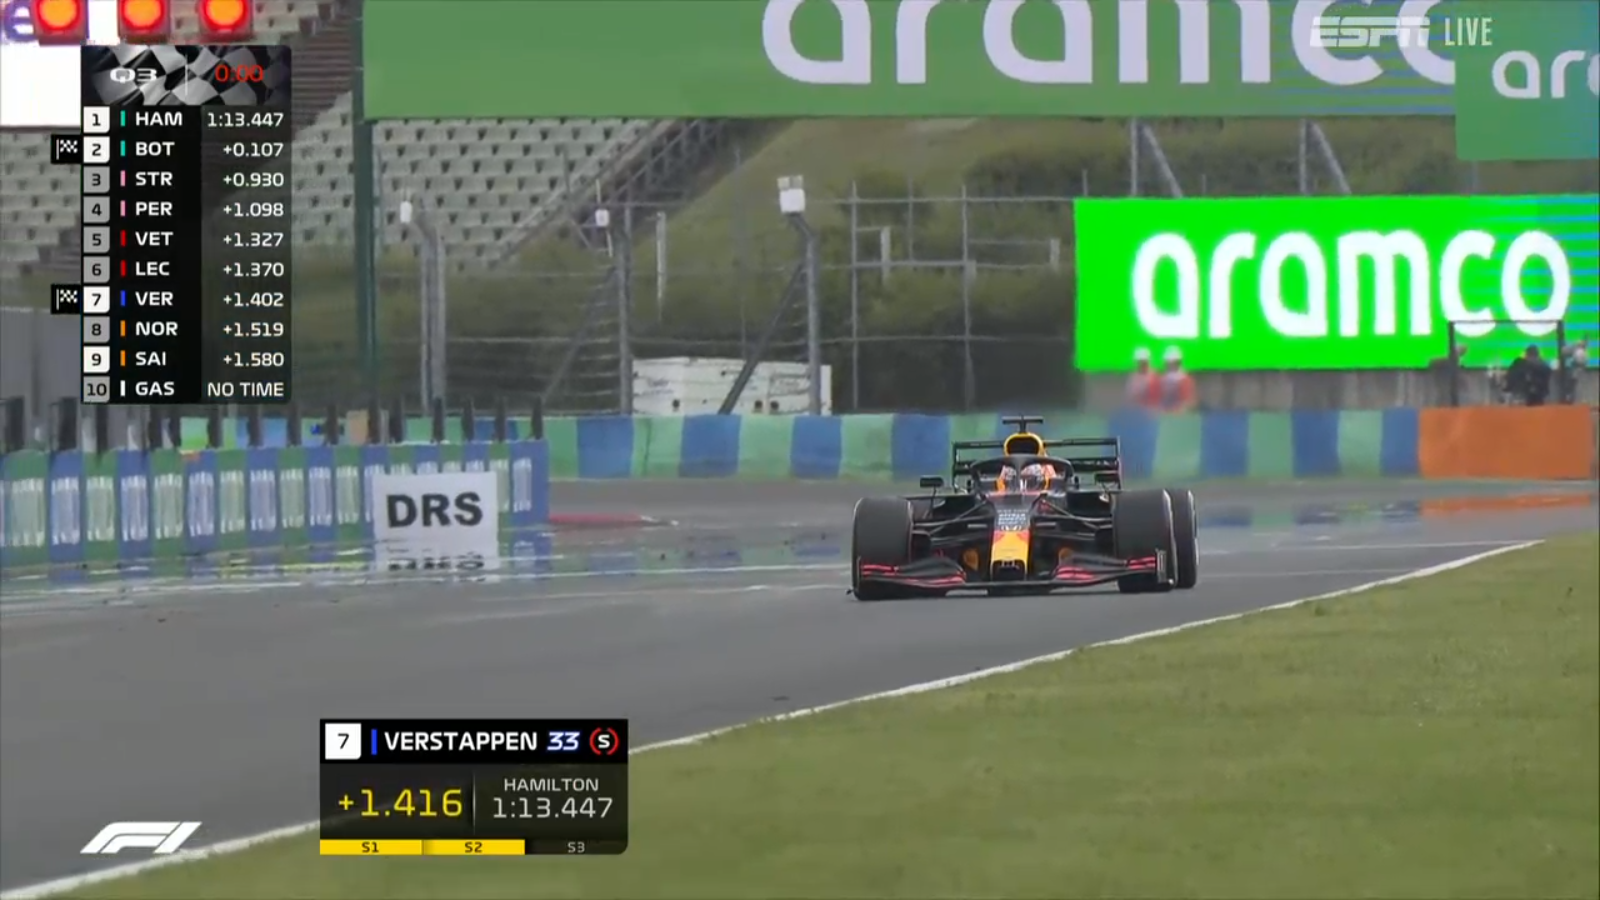 Max Verstappen for Red Bull Racing Honda, at the end of Q3, will start Sunday's race in 3rd position.